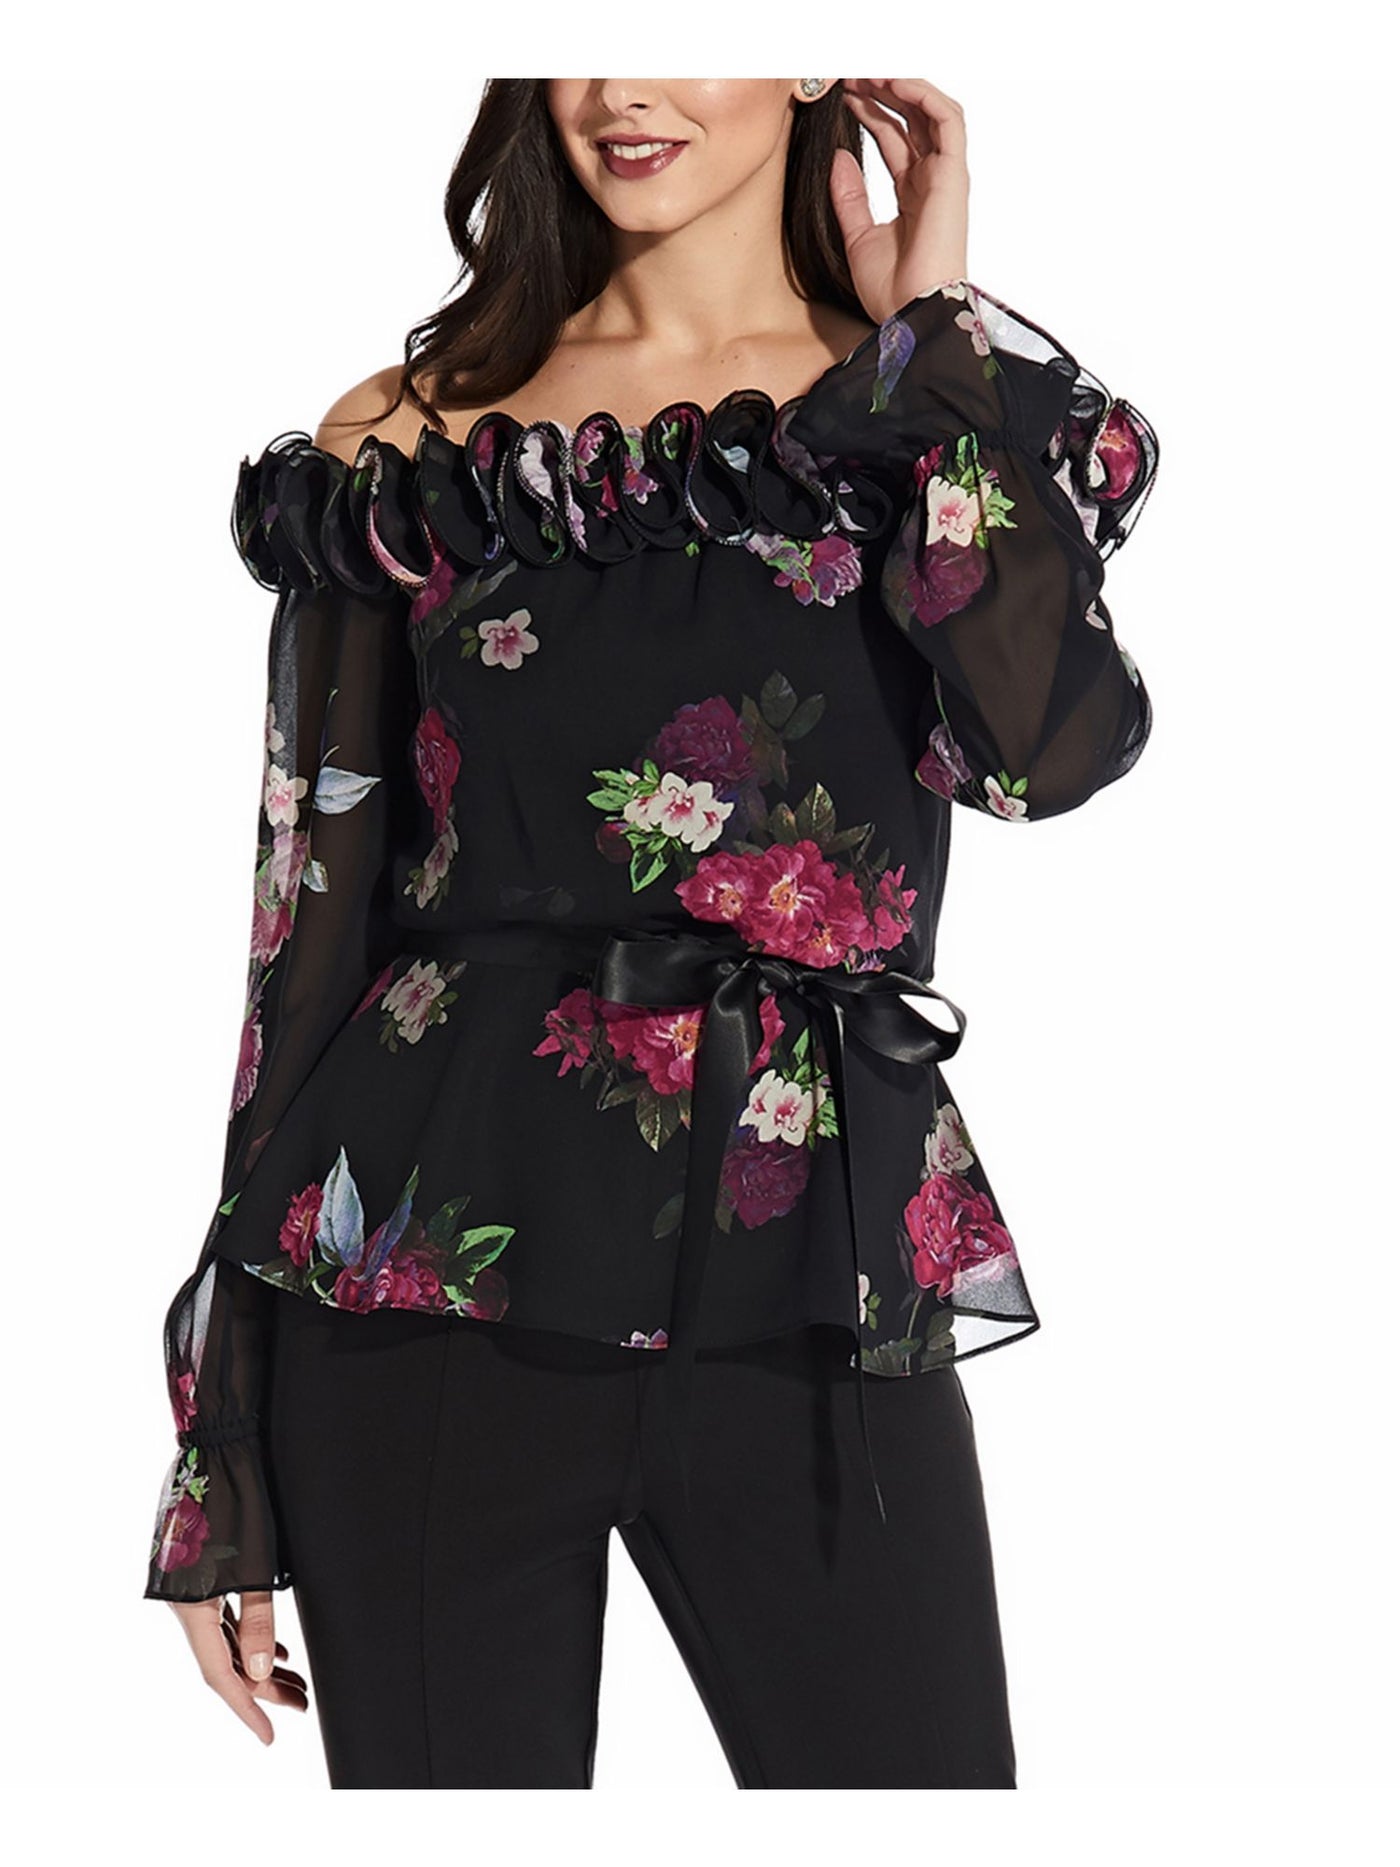 ADRIANNA PAPELL Womens Black Ruffled Belted Elastic Waist Lined Floral Long Sleeve Off Shoulder Evening Top 2